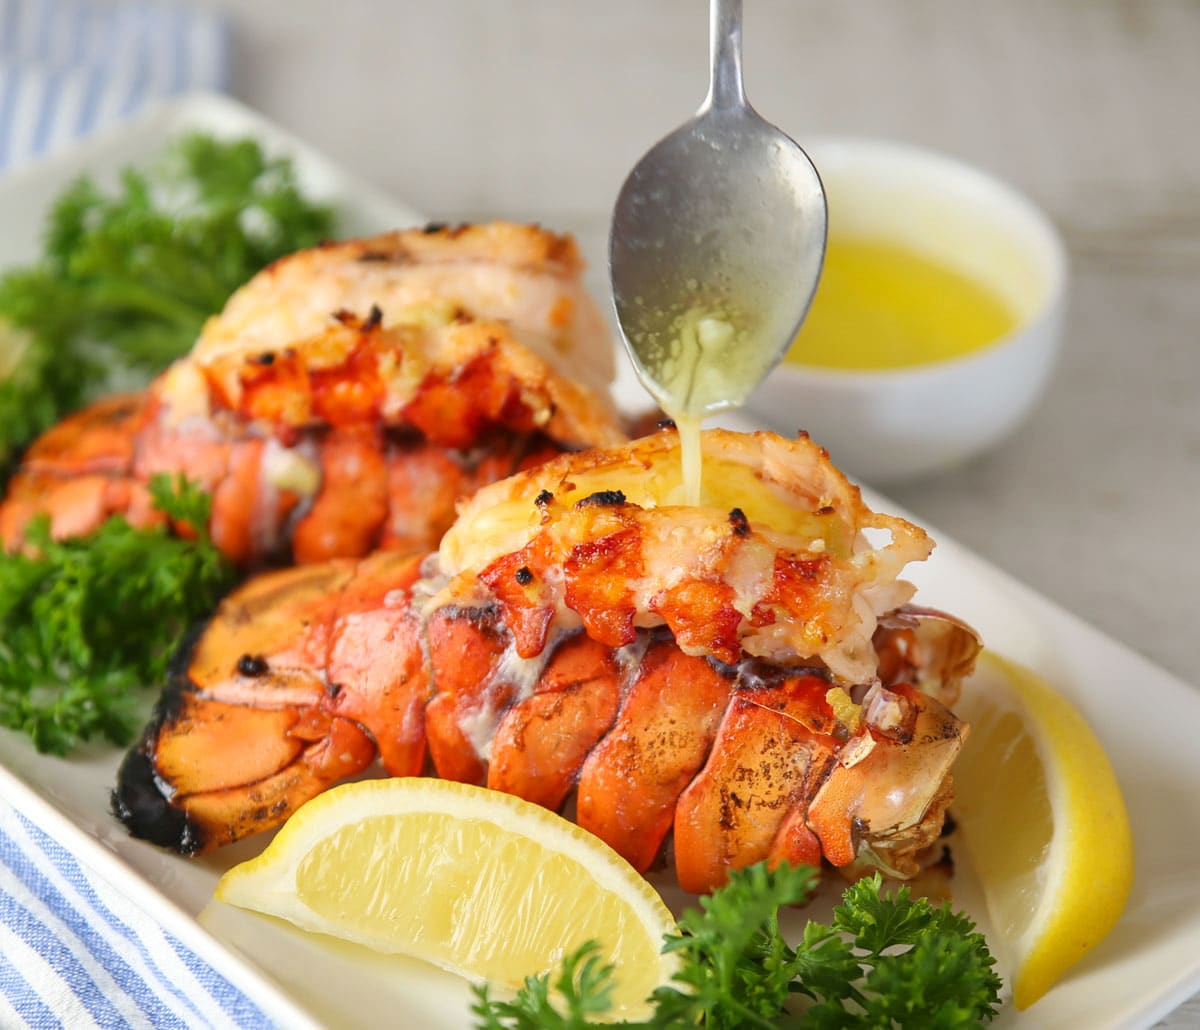 The Best Lobster Tail Recipe Ever!